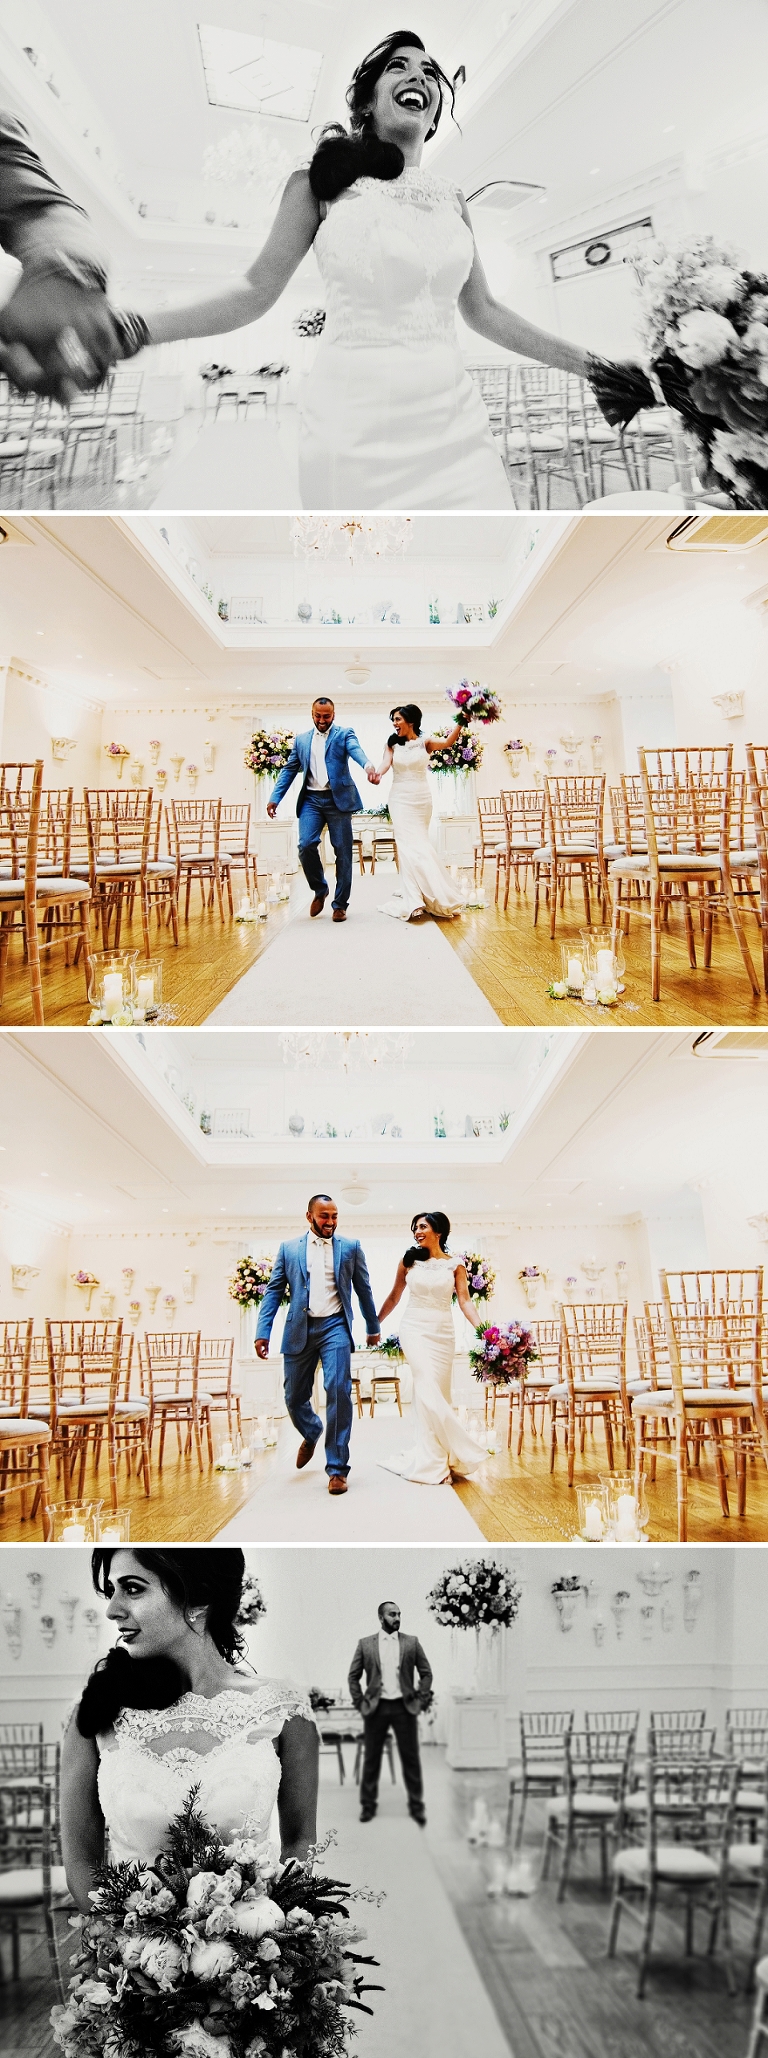 An Ashfield House ceremony at styled wedding photoshoot